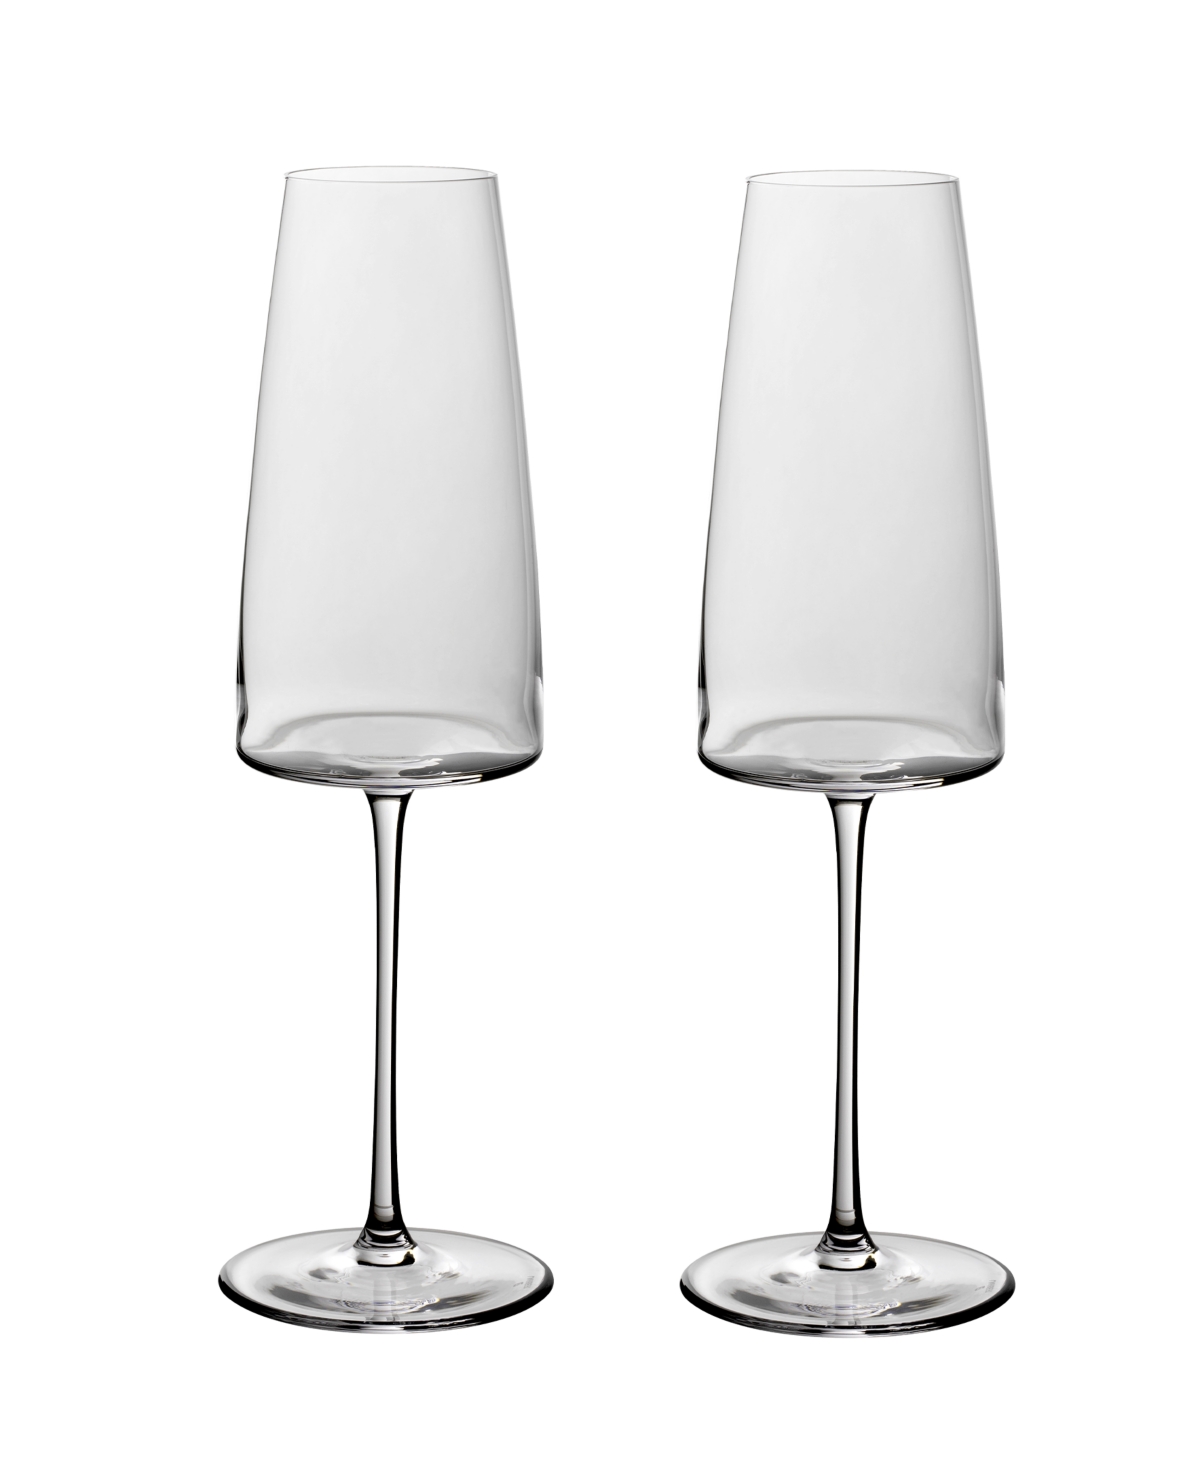 Villeroy & Boch Metro Chic Champagne Flute Set, 2 Piece In Clear